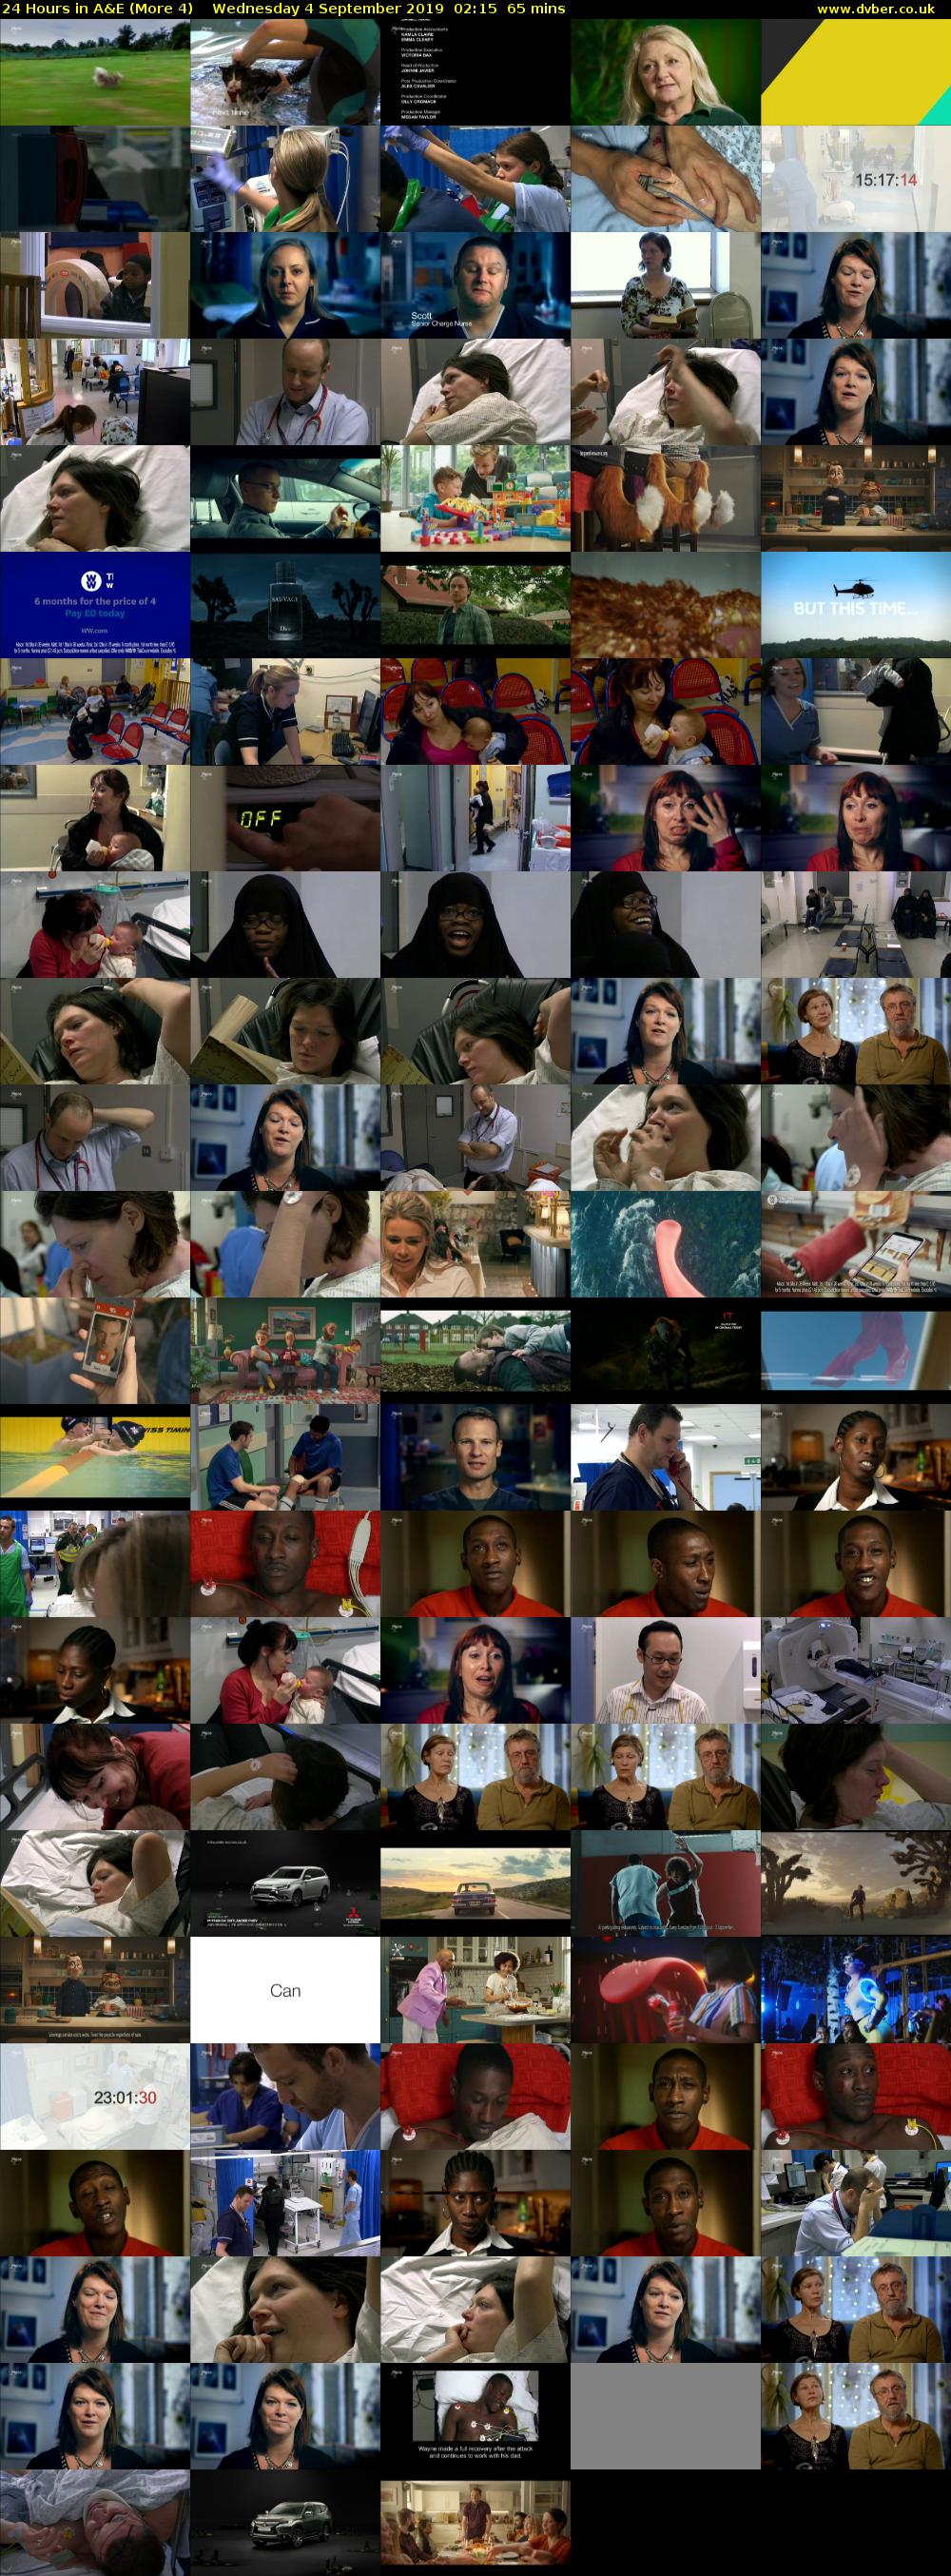 24 Hours in A&E (More 4) Wednesday 4 September 2019 02:15 - 03:20